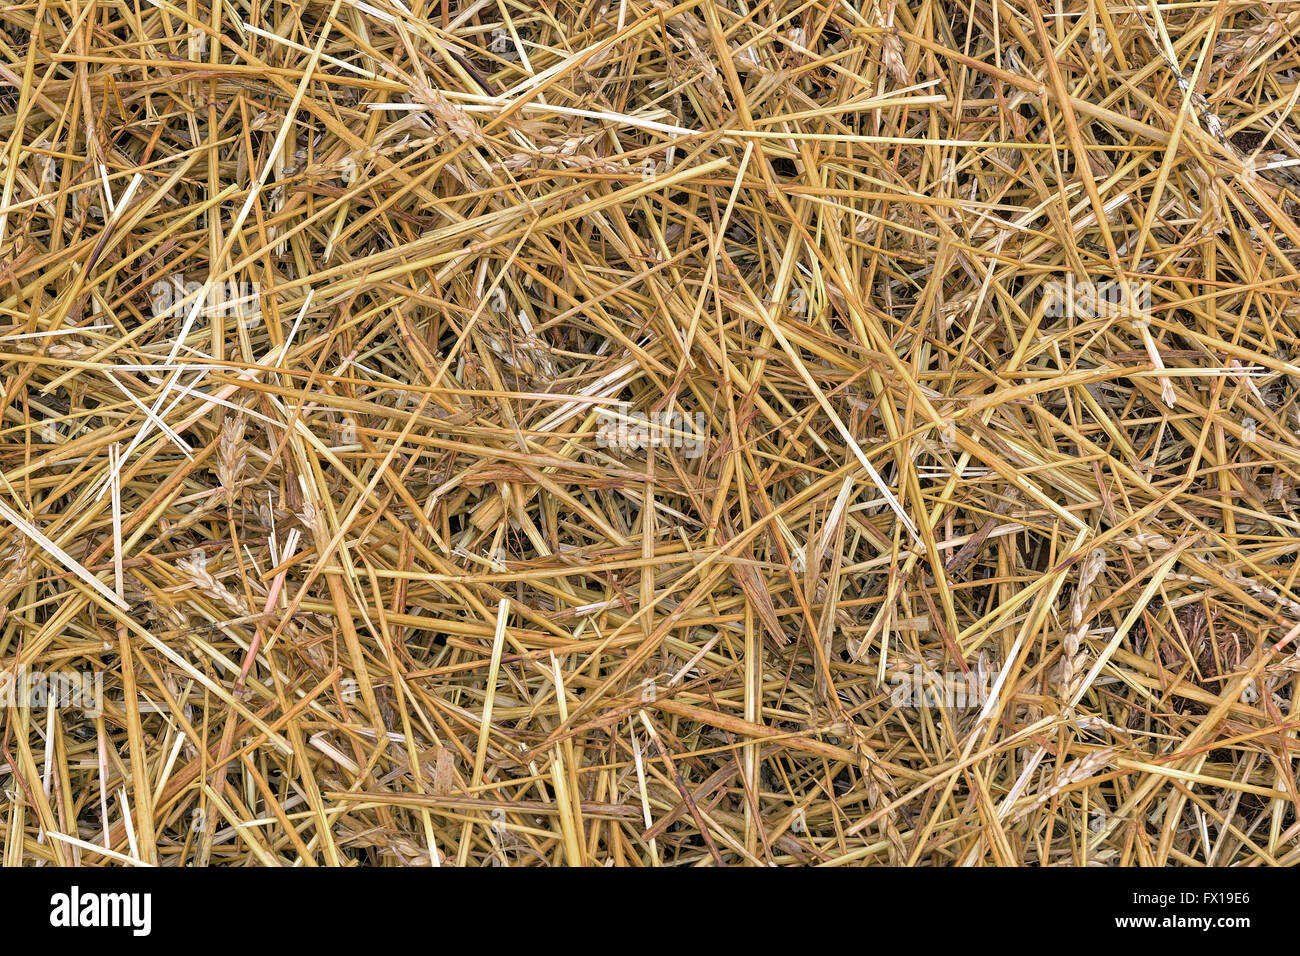 Wheat Grass Hay havested during fall season for cow feed background Stock Photo